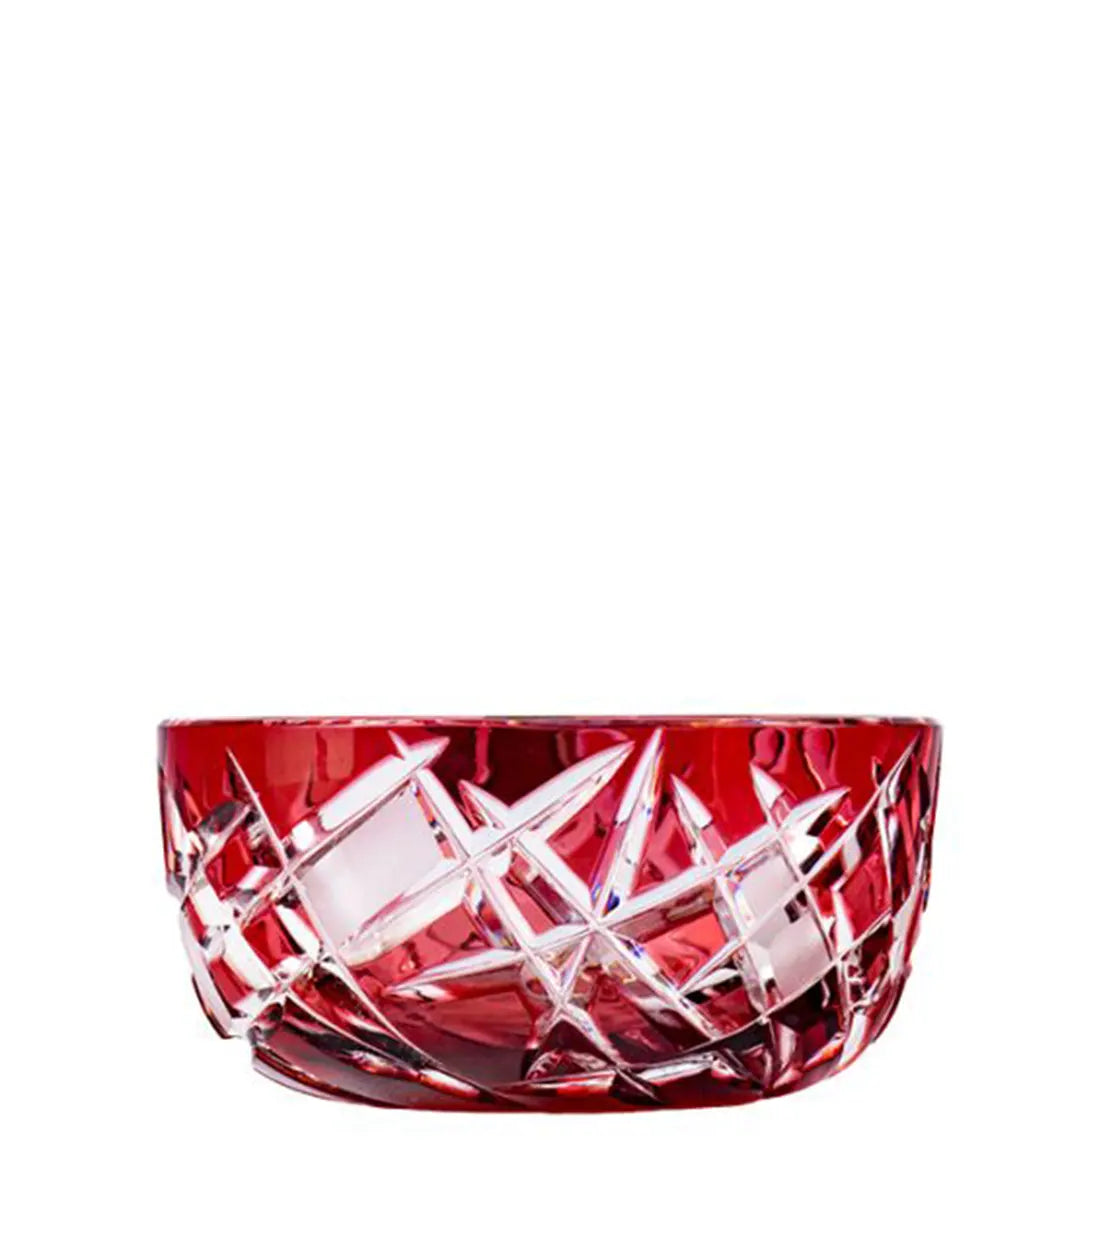 CAESAR CRYSTAL BOHEMIAE - Anthurium Bowl of the Gods - Brilliantly Crafted Crystal Bowl.